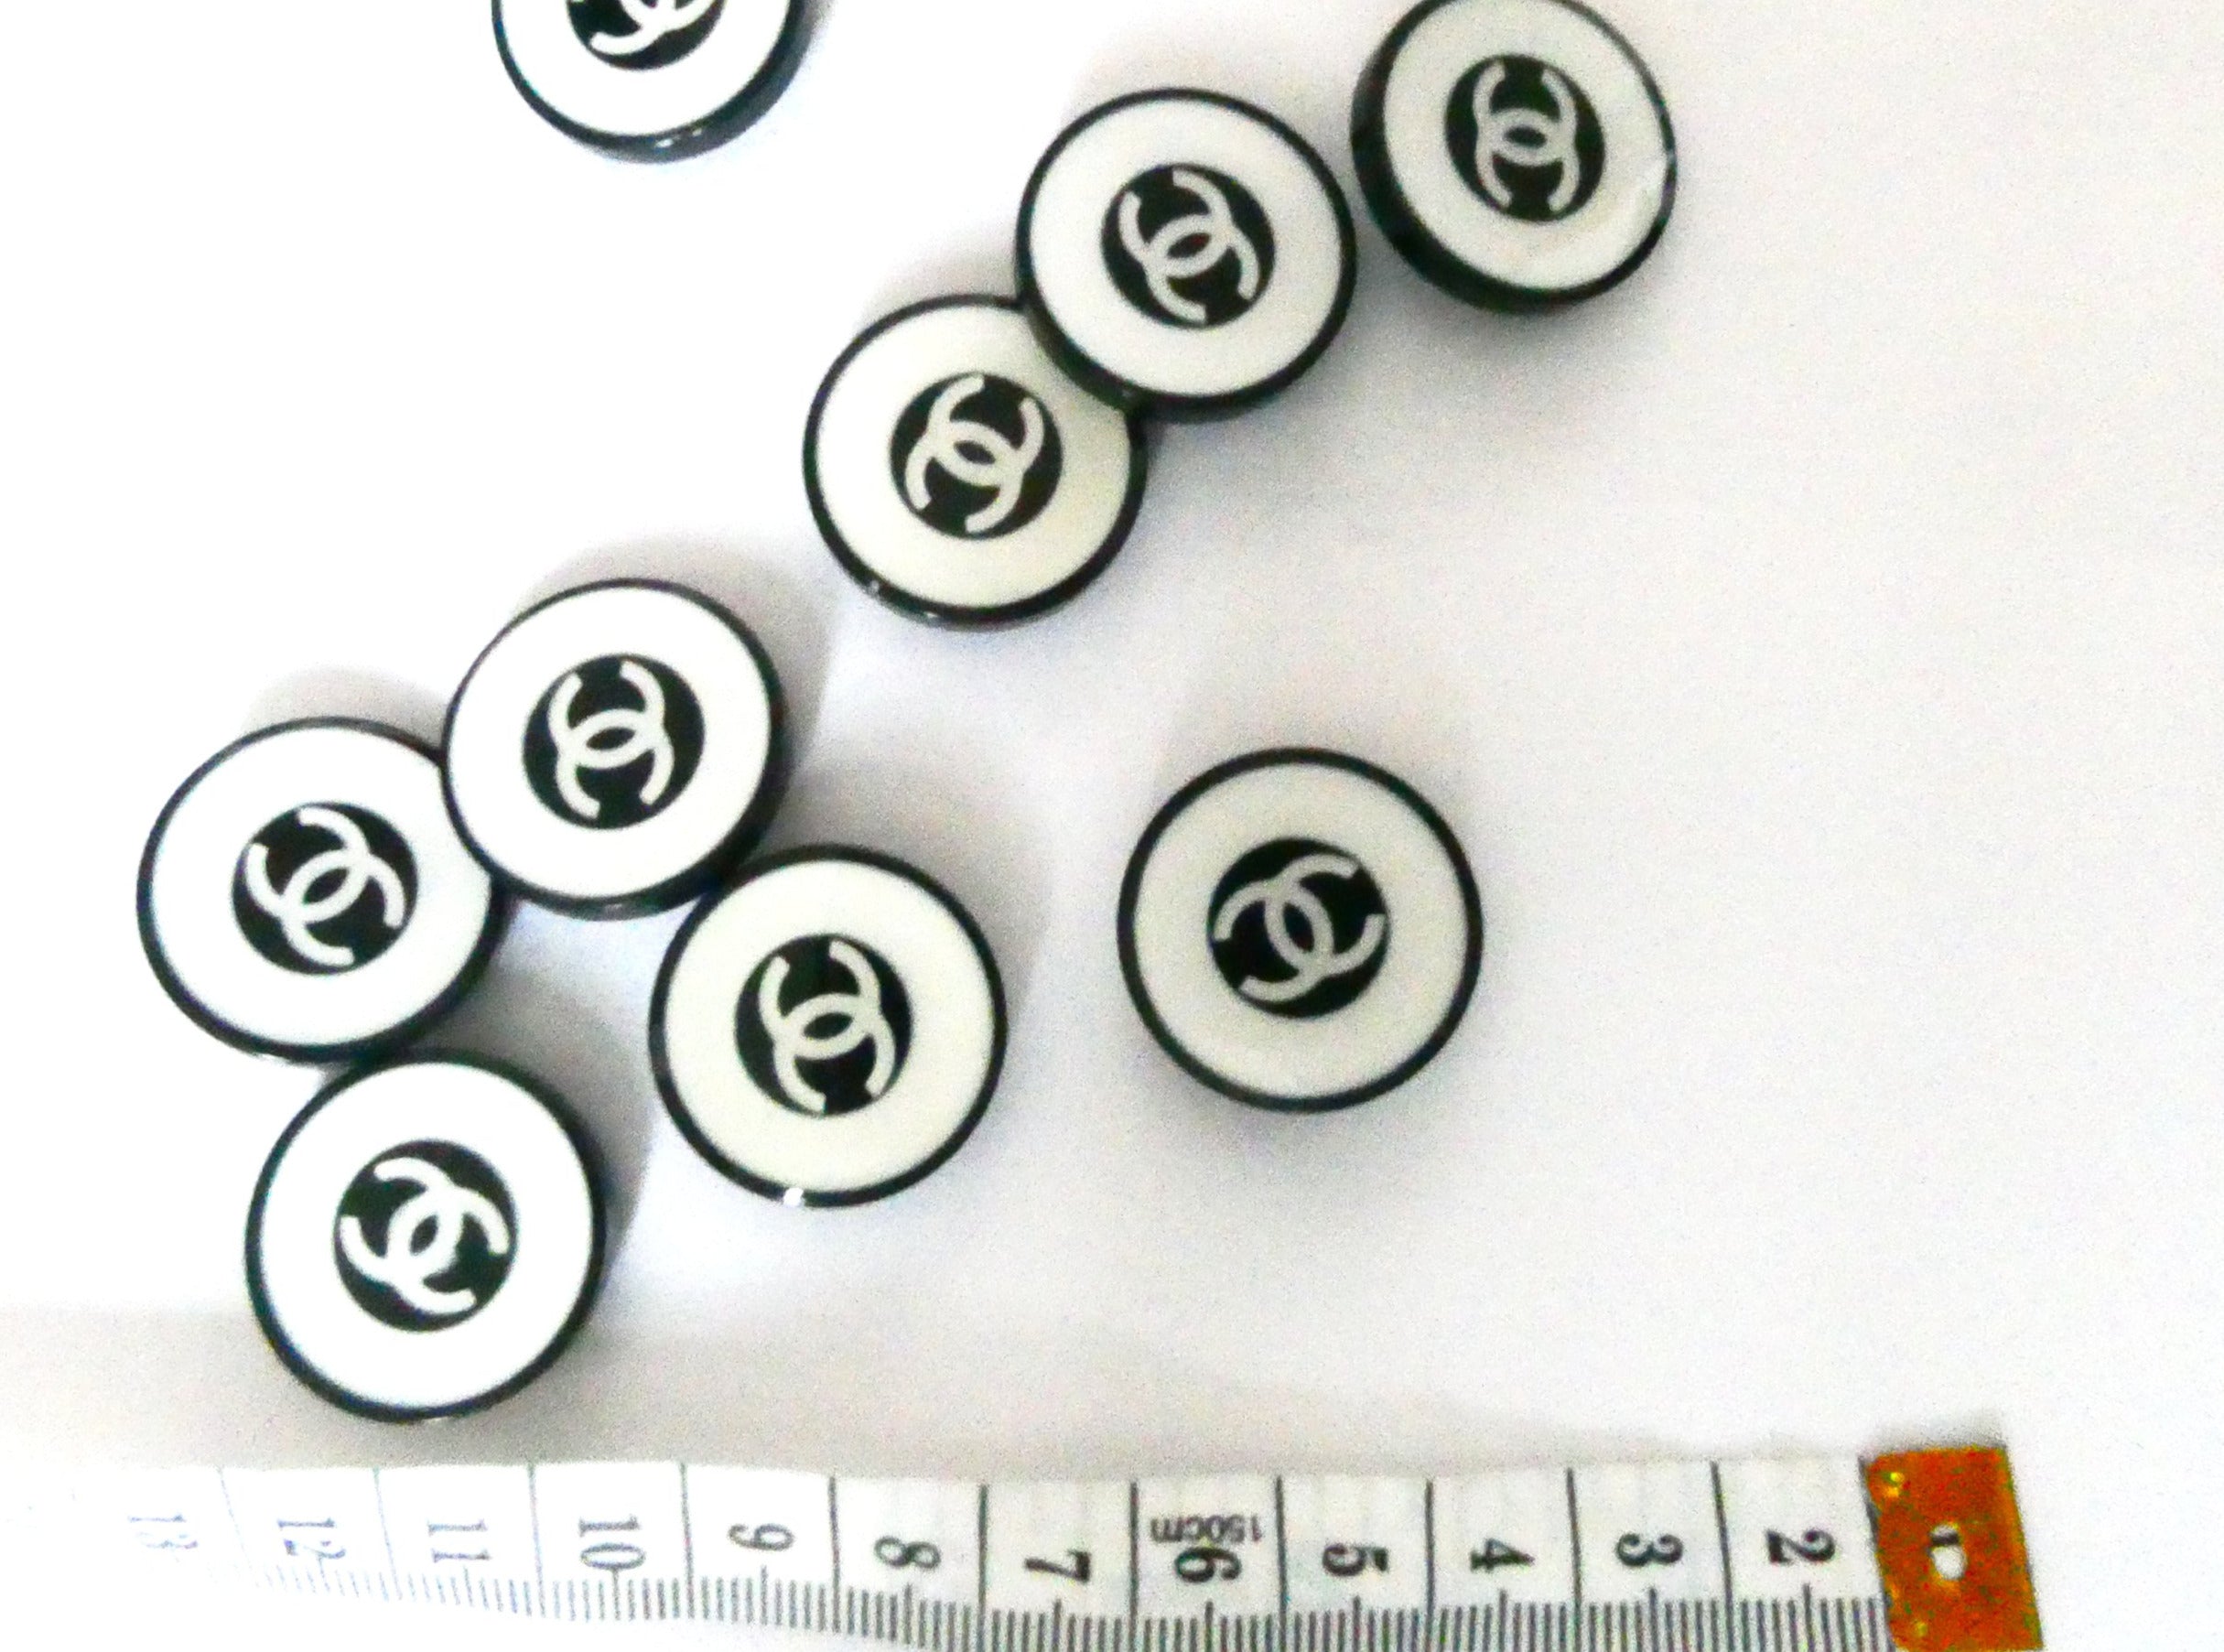 Lot 232 - Sixty-five Chanel buttons, mainly 1992-97